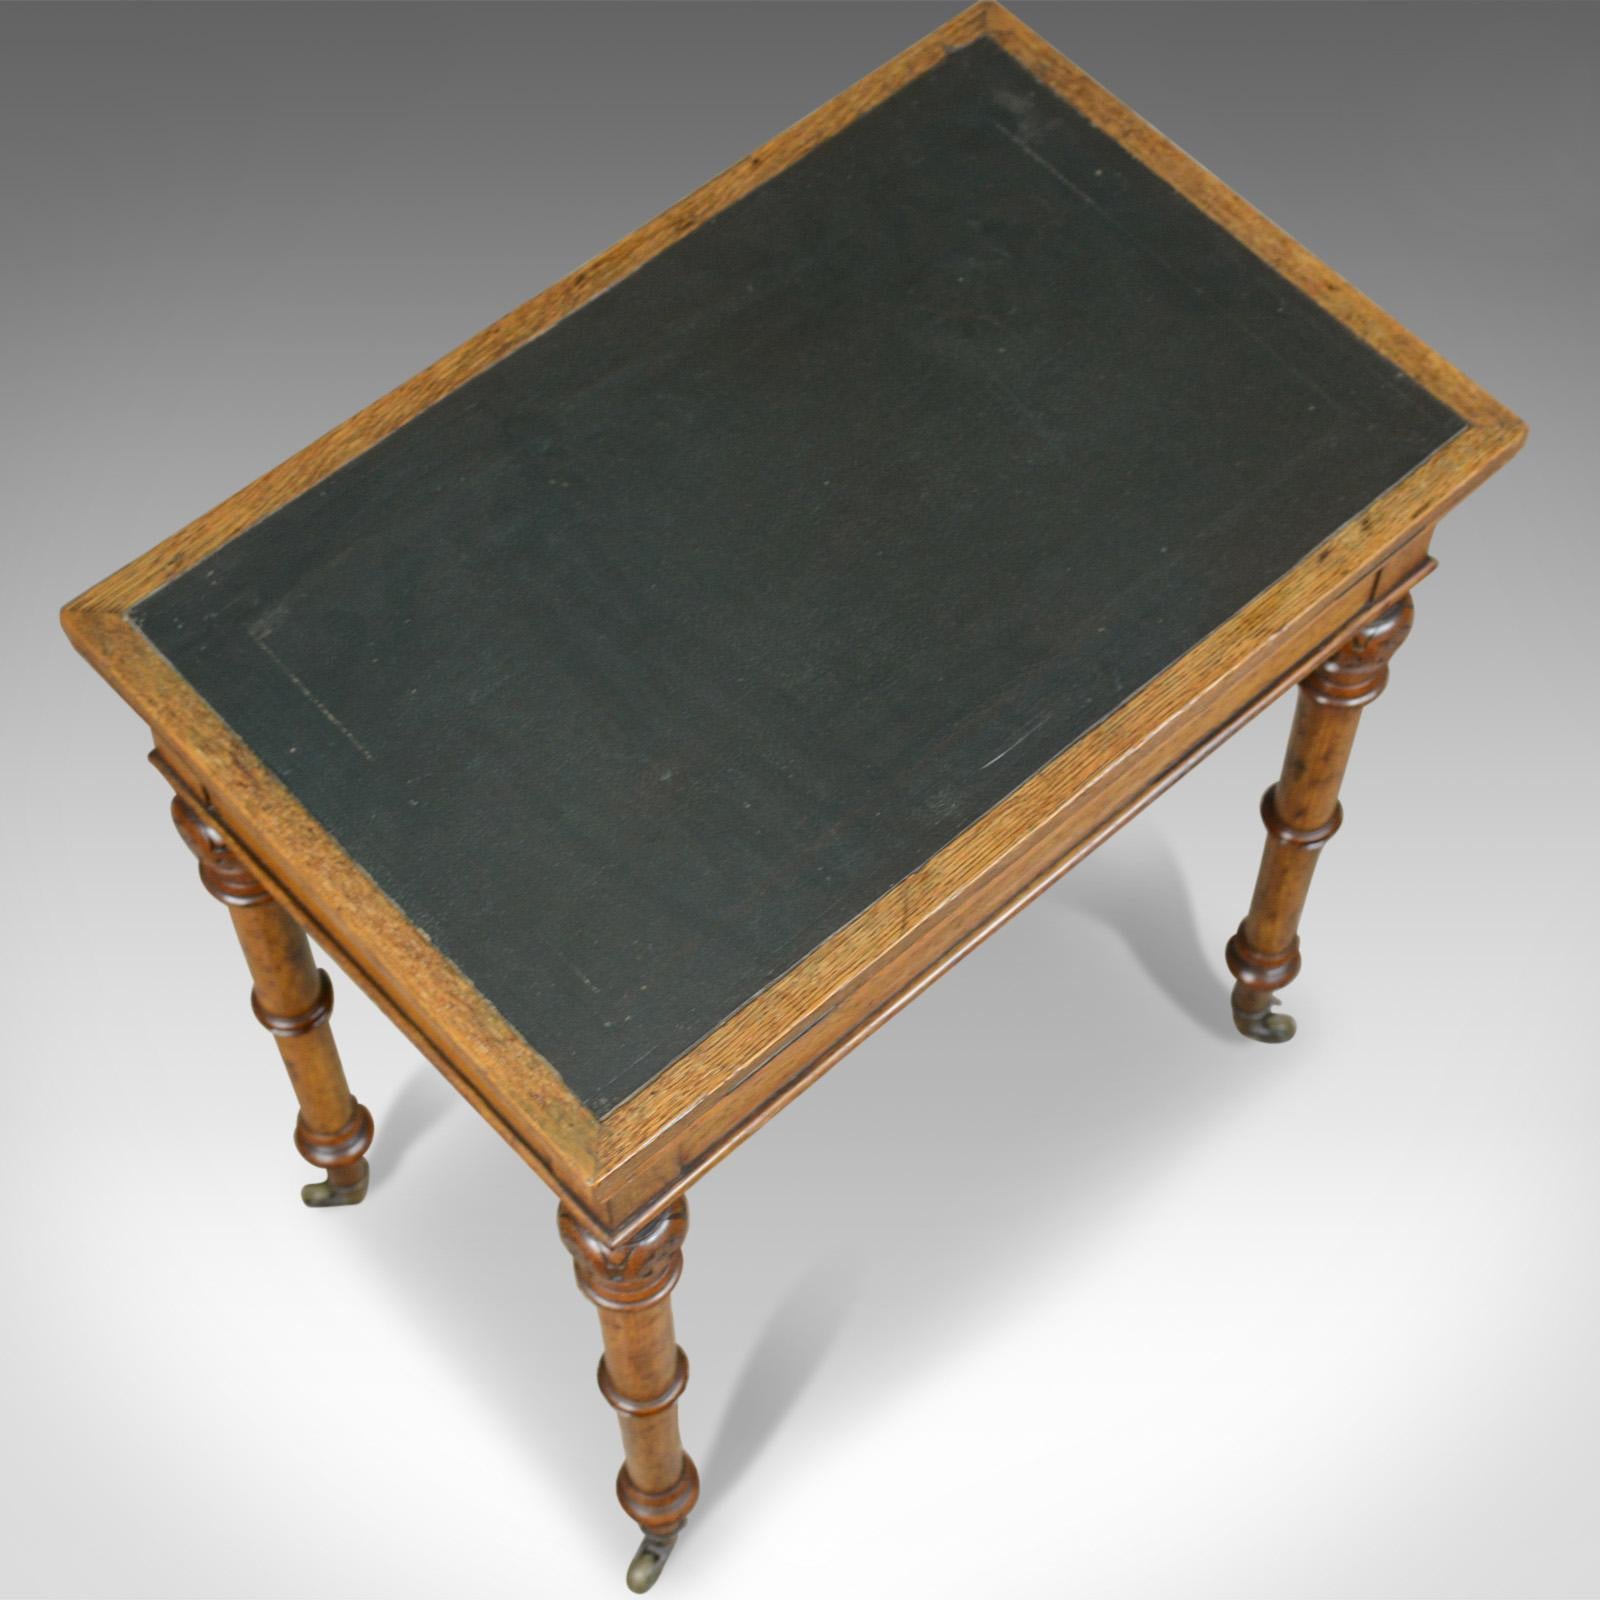 19th Century Antique, Adjustable Writing Table, English, Oak, Johnstone and Jeanes circa 1850